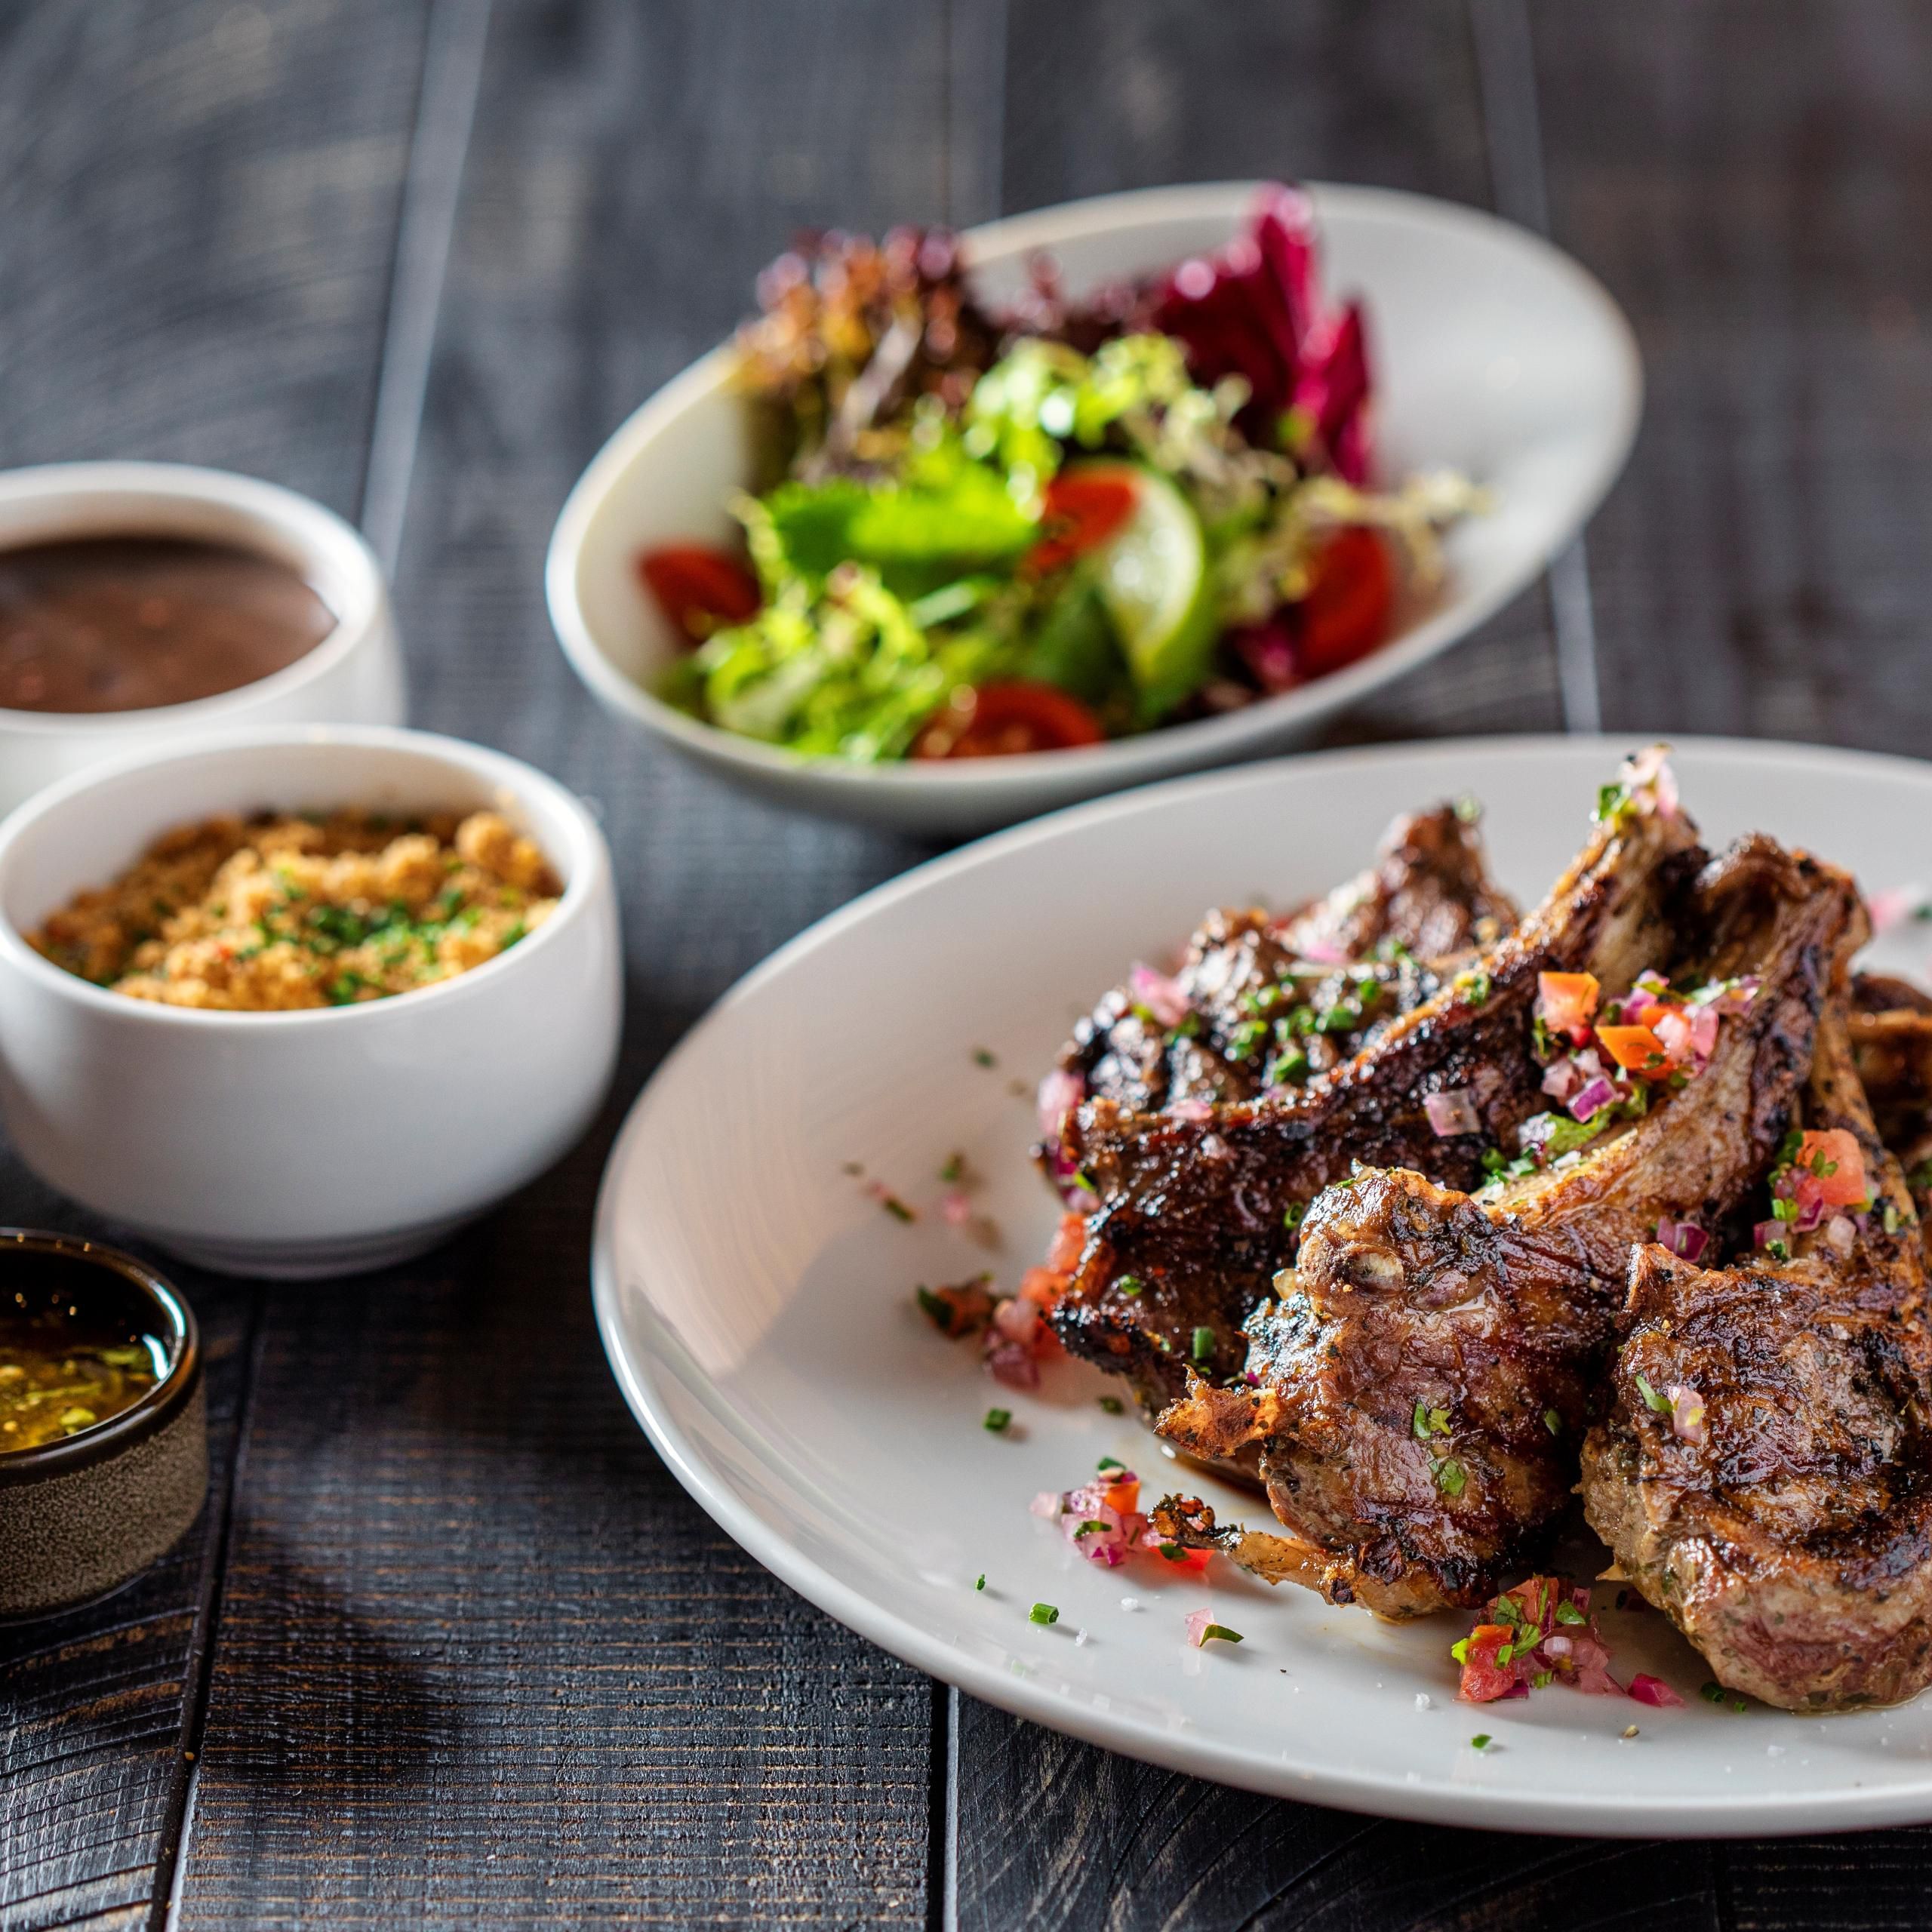 Lamb chops grilled and flavoured to perfection